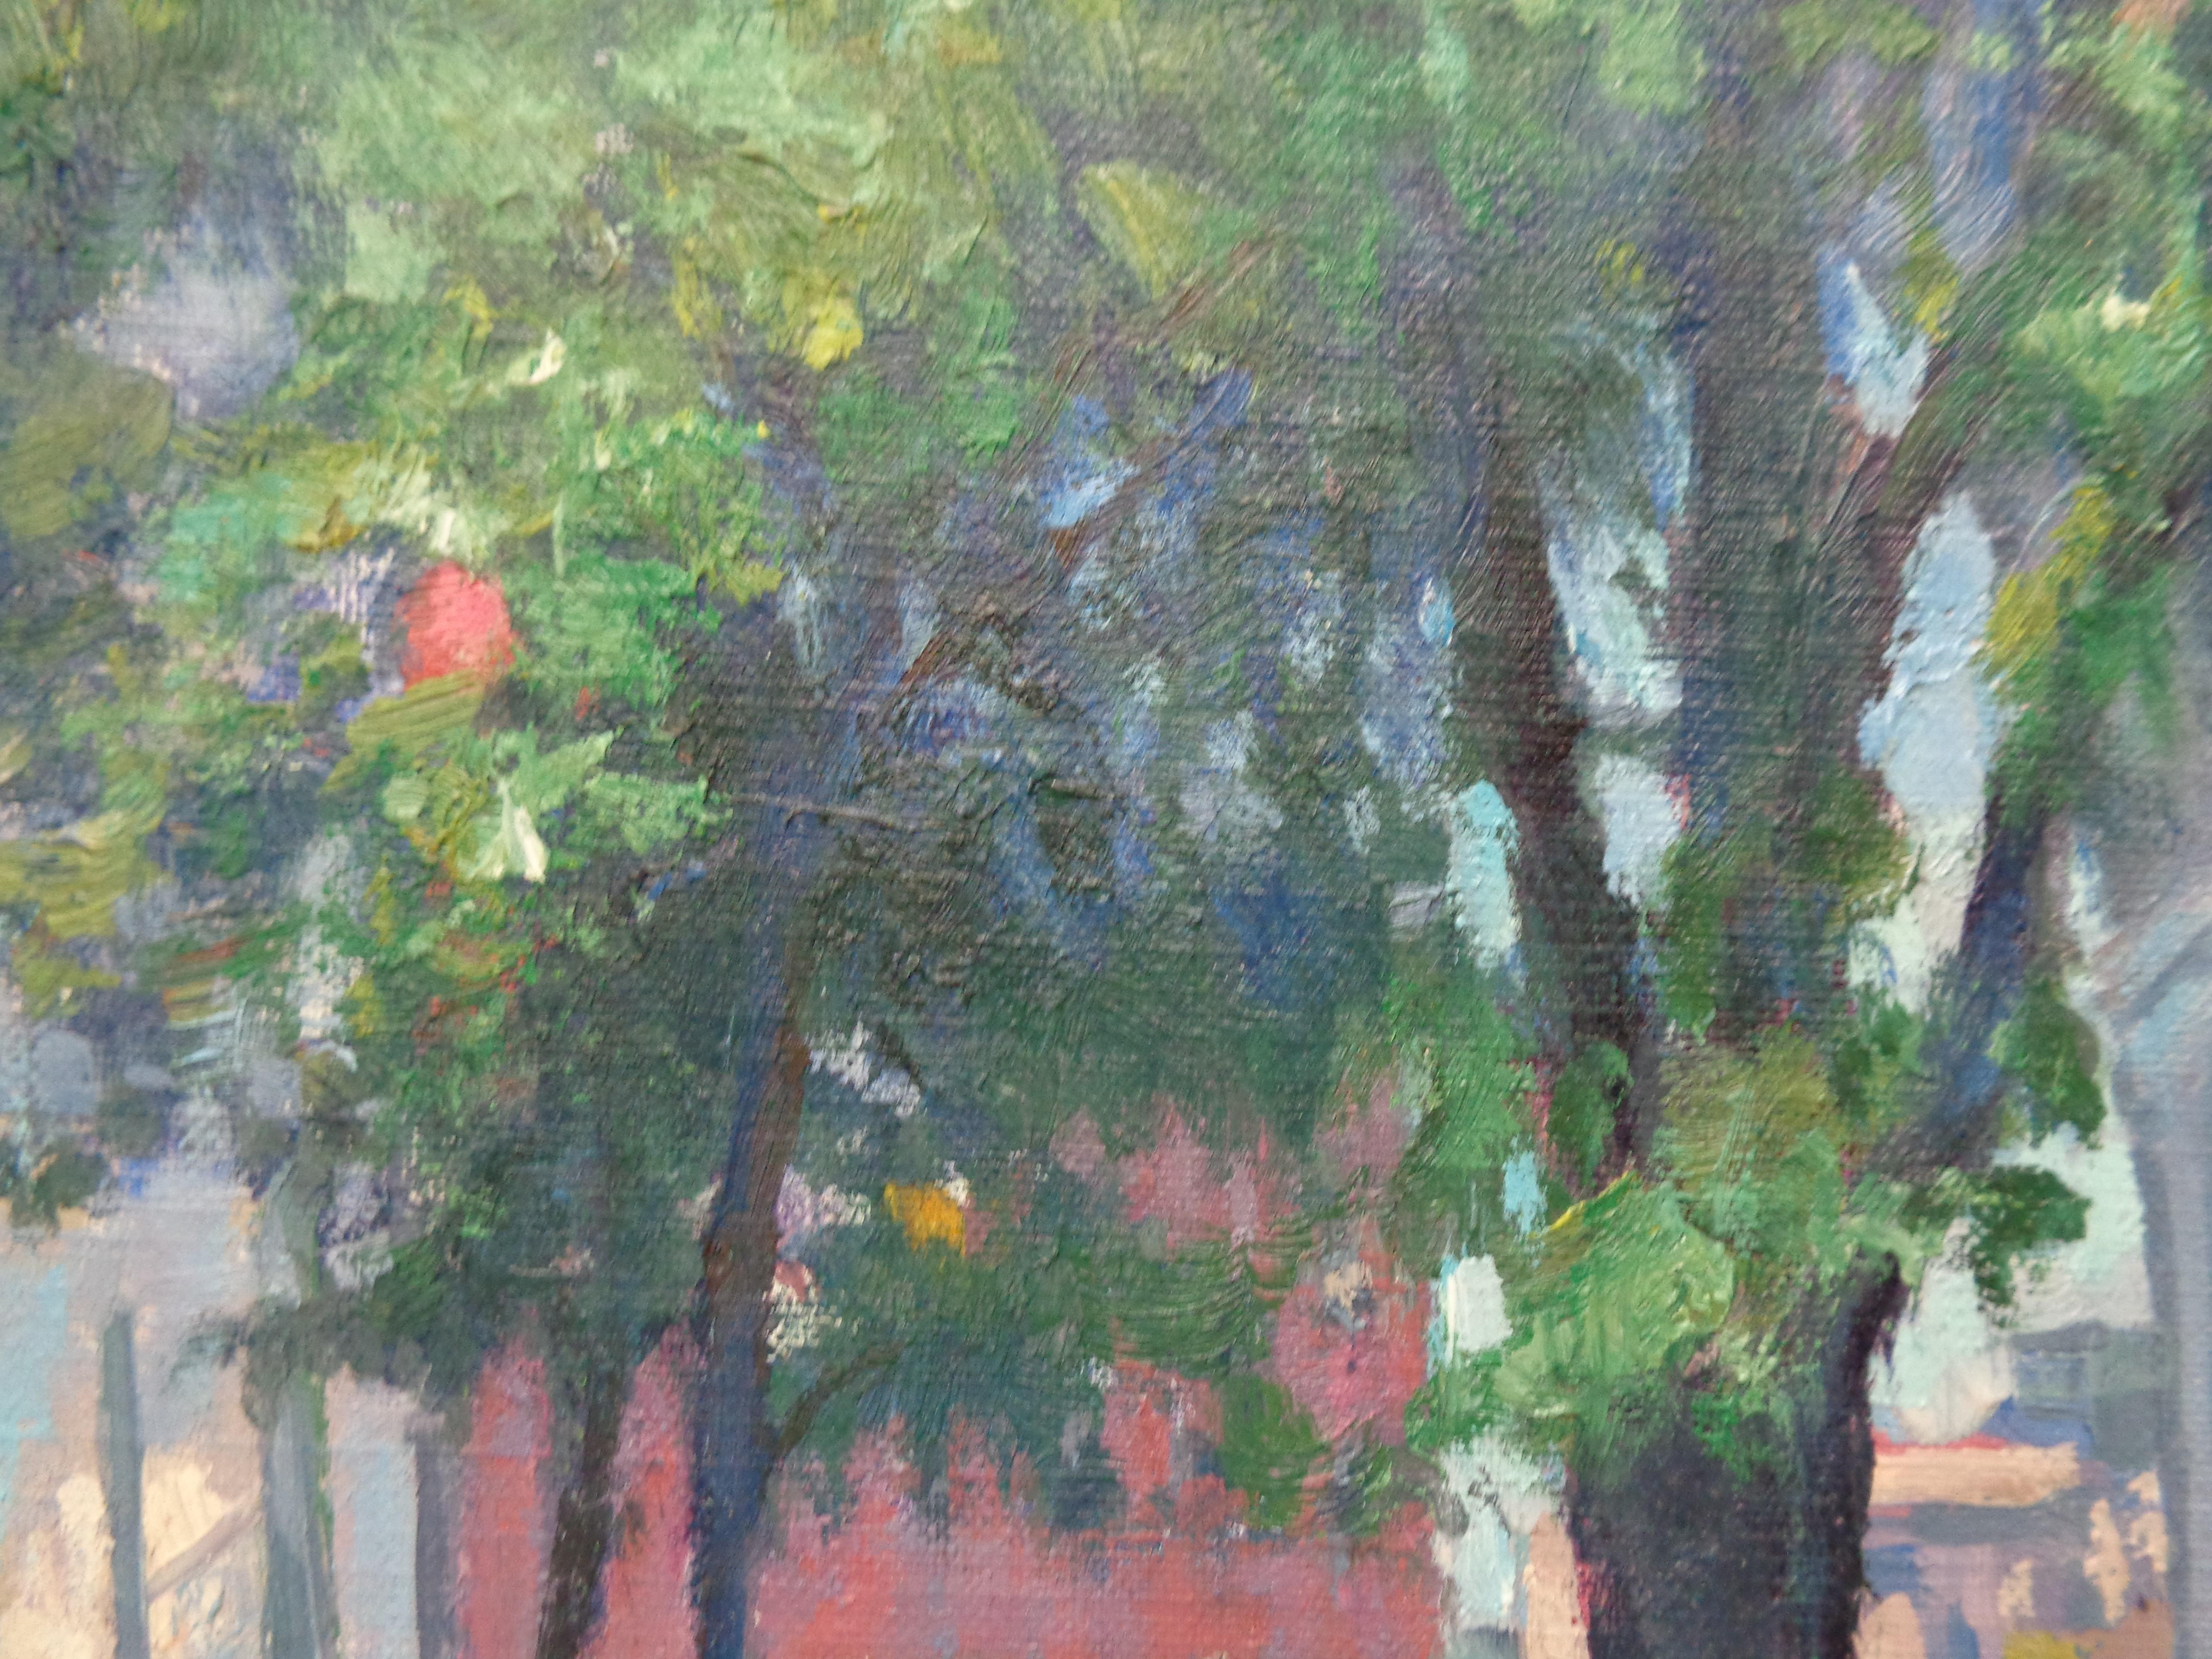  New York City Washington Square Spring 5th Avenue Oil Painting Michael Budden  For Sale 1